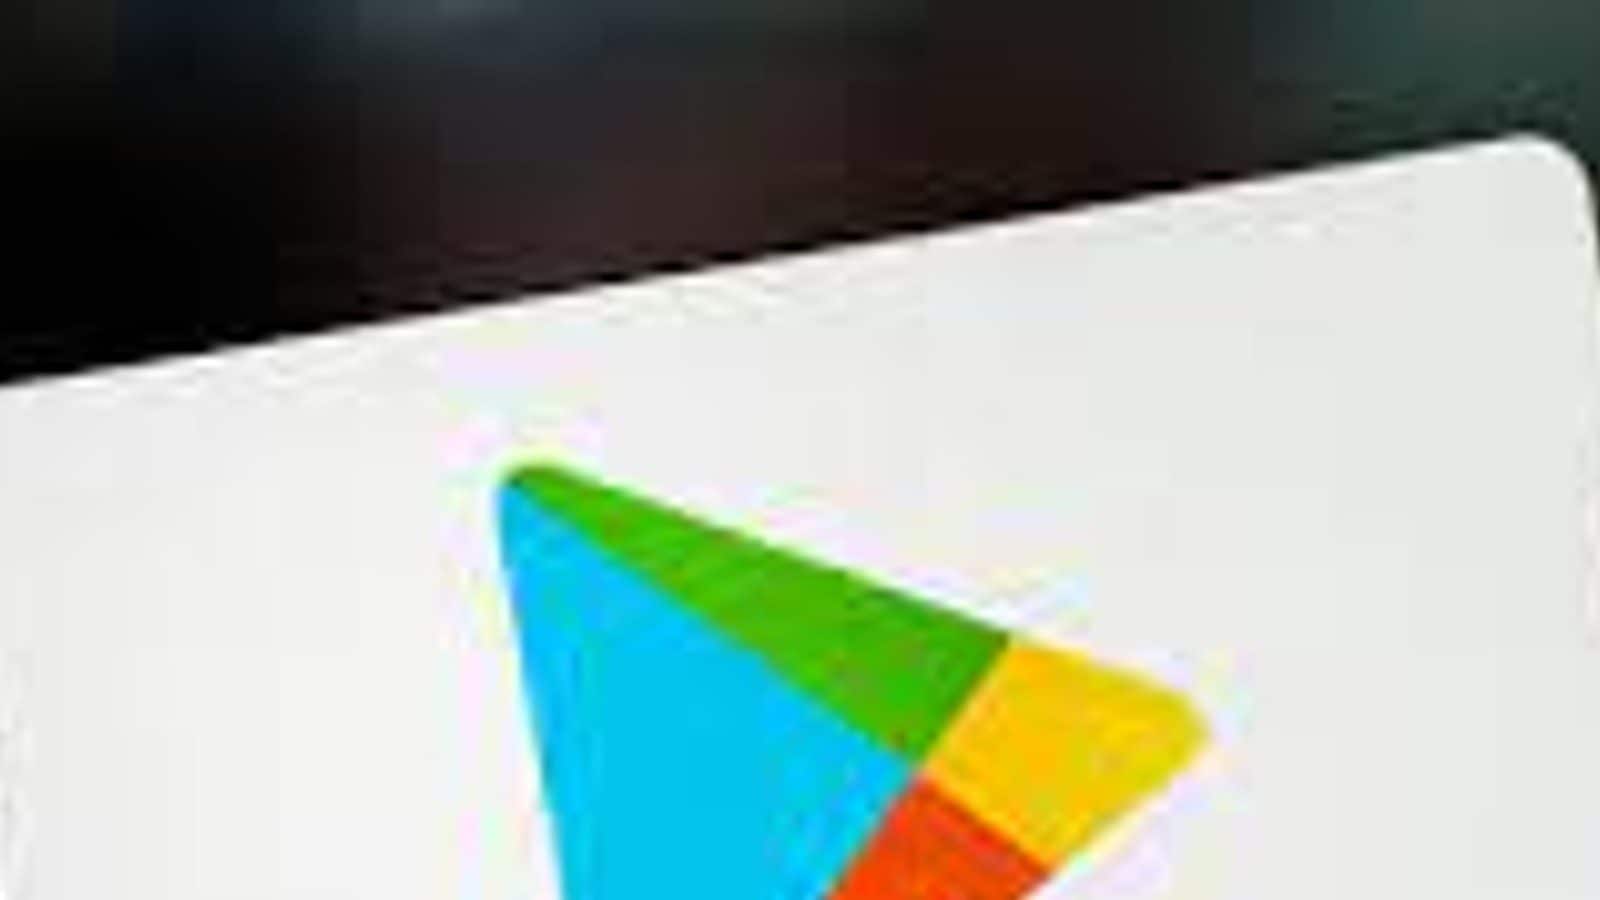 Google Play Store: It's easy to know how much information a user has in an app

